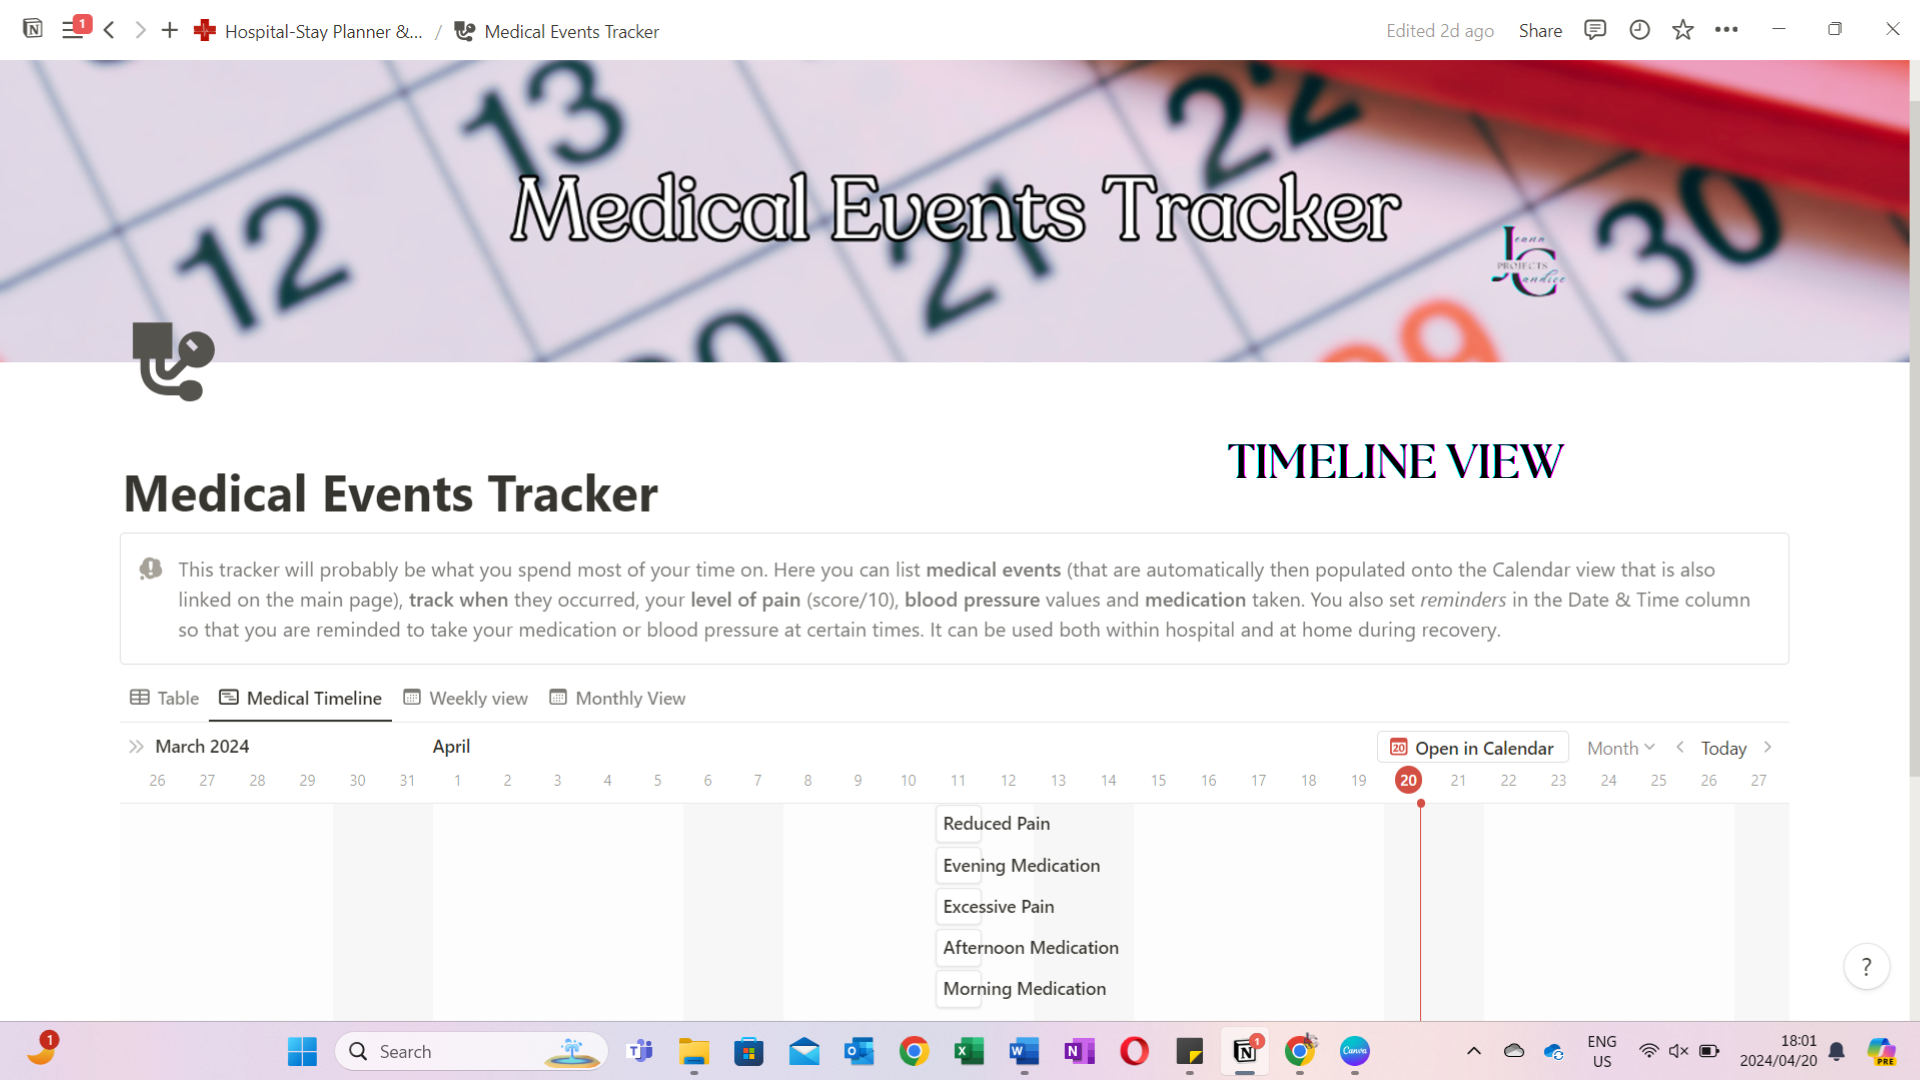 Having to go to hospital is stressful enough already, so why put extra pressure on yourself to figure out and remember what to take and what preparations to do in advance? This template is designed for you to keep track of all your need to do, know & track throughout the process.